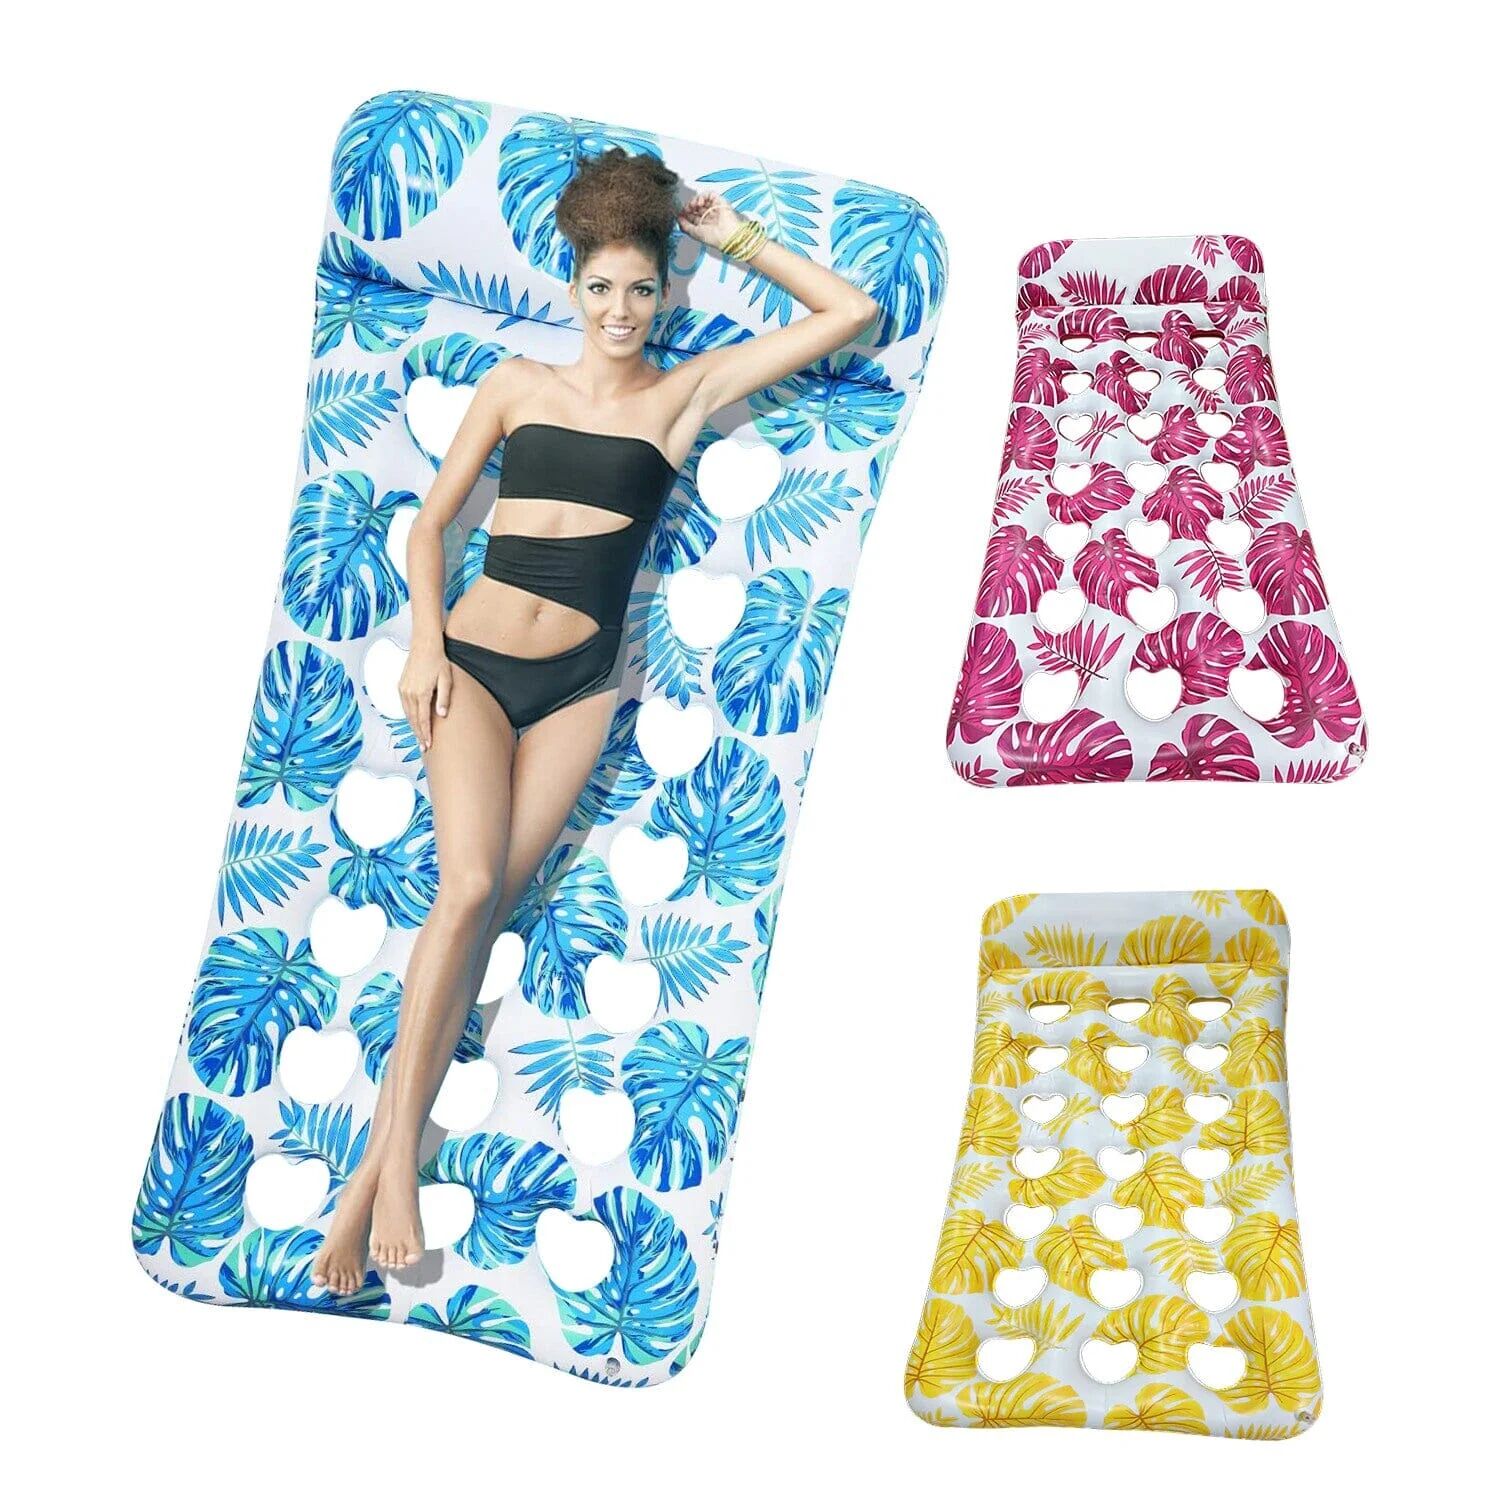 DailySale 3-Pack: Inflatable Pool Float Raft Water Lounge 330lbs Load-Bearing Mattress with Headrest